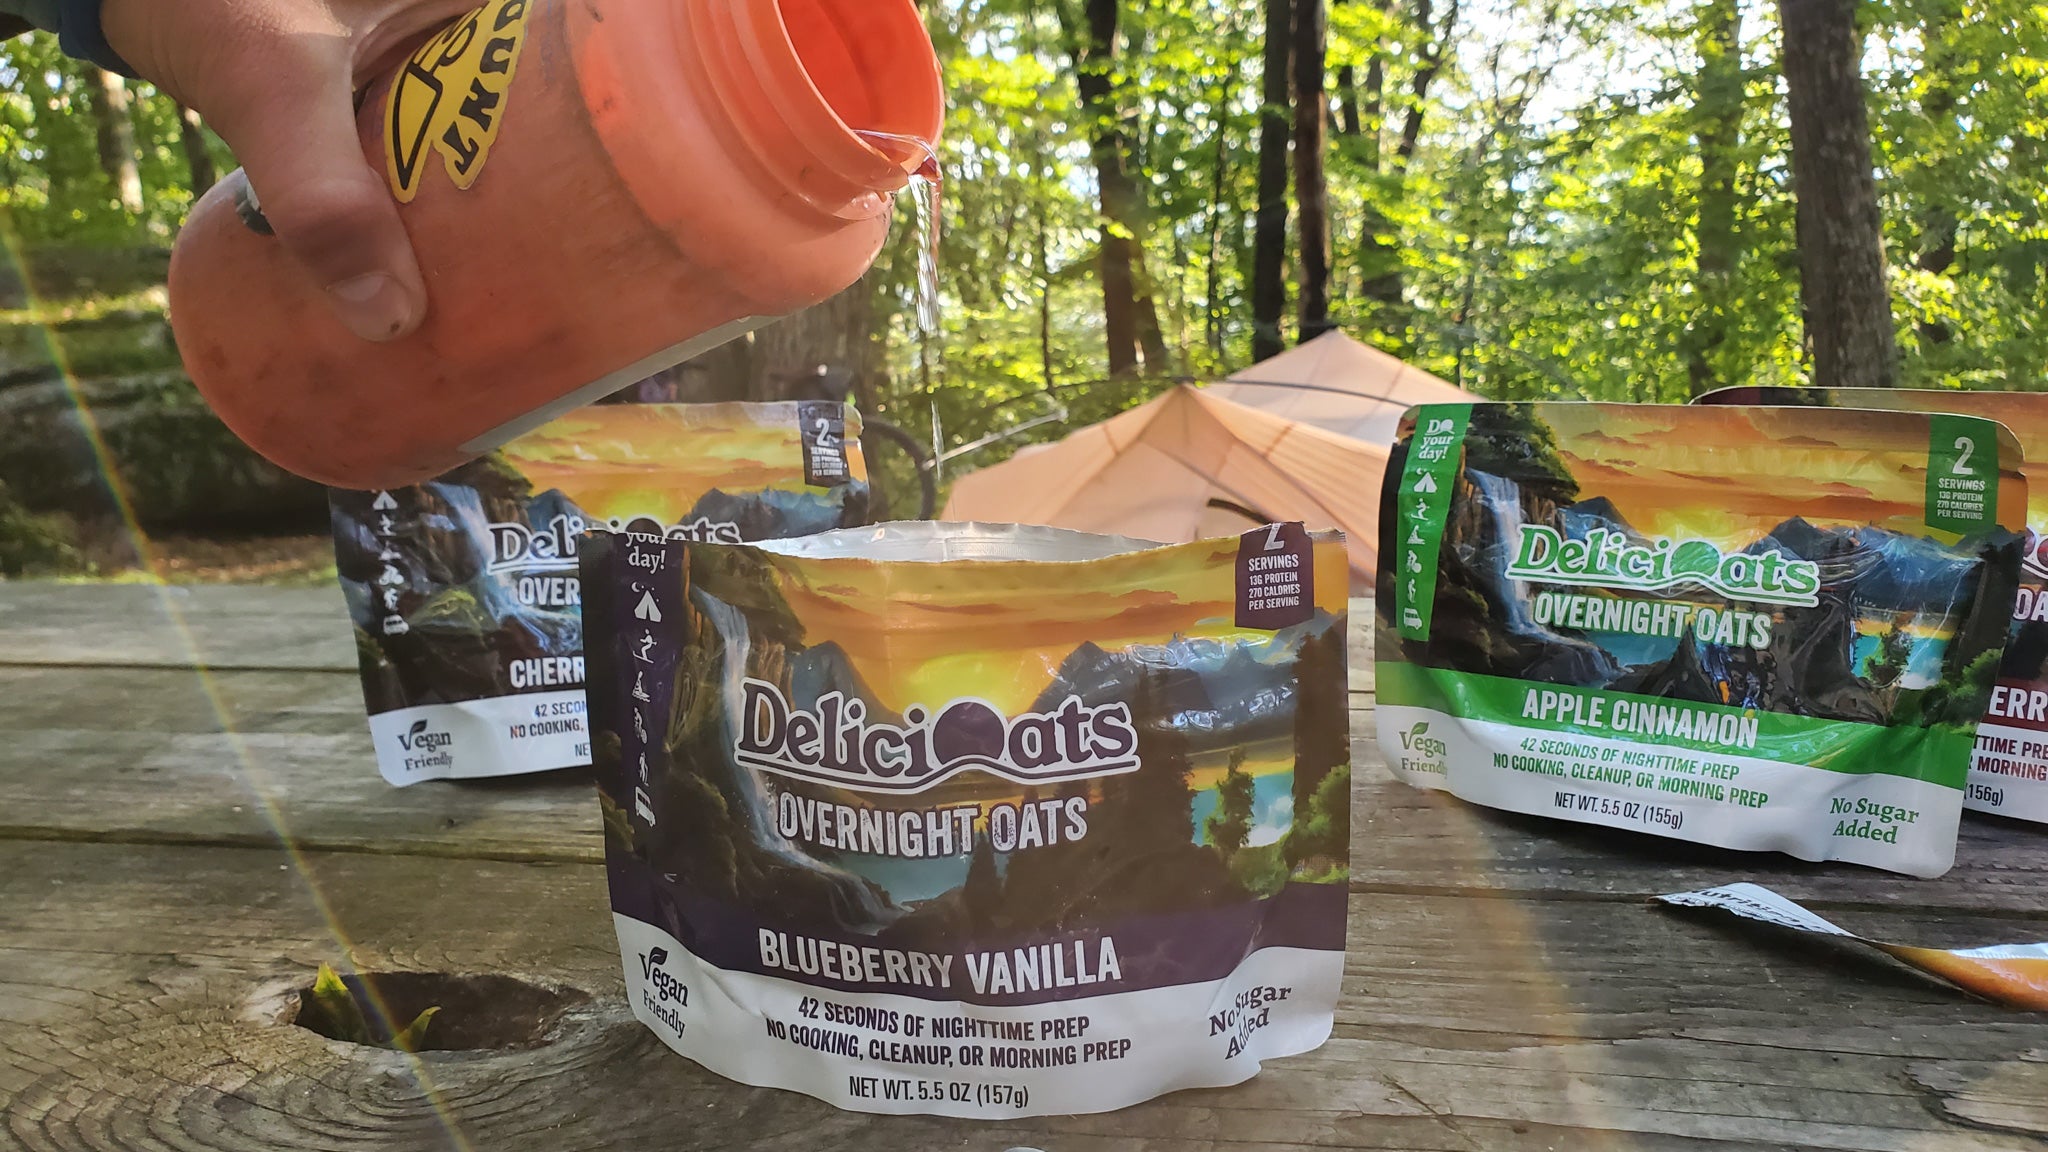 DeliciOats Overnight Oats Coldsoak Stoveless Tasty Healthy Review GGG Garage Grown Gear